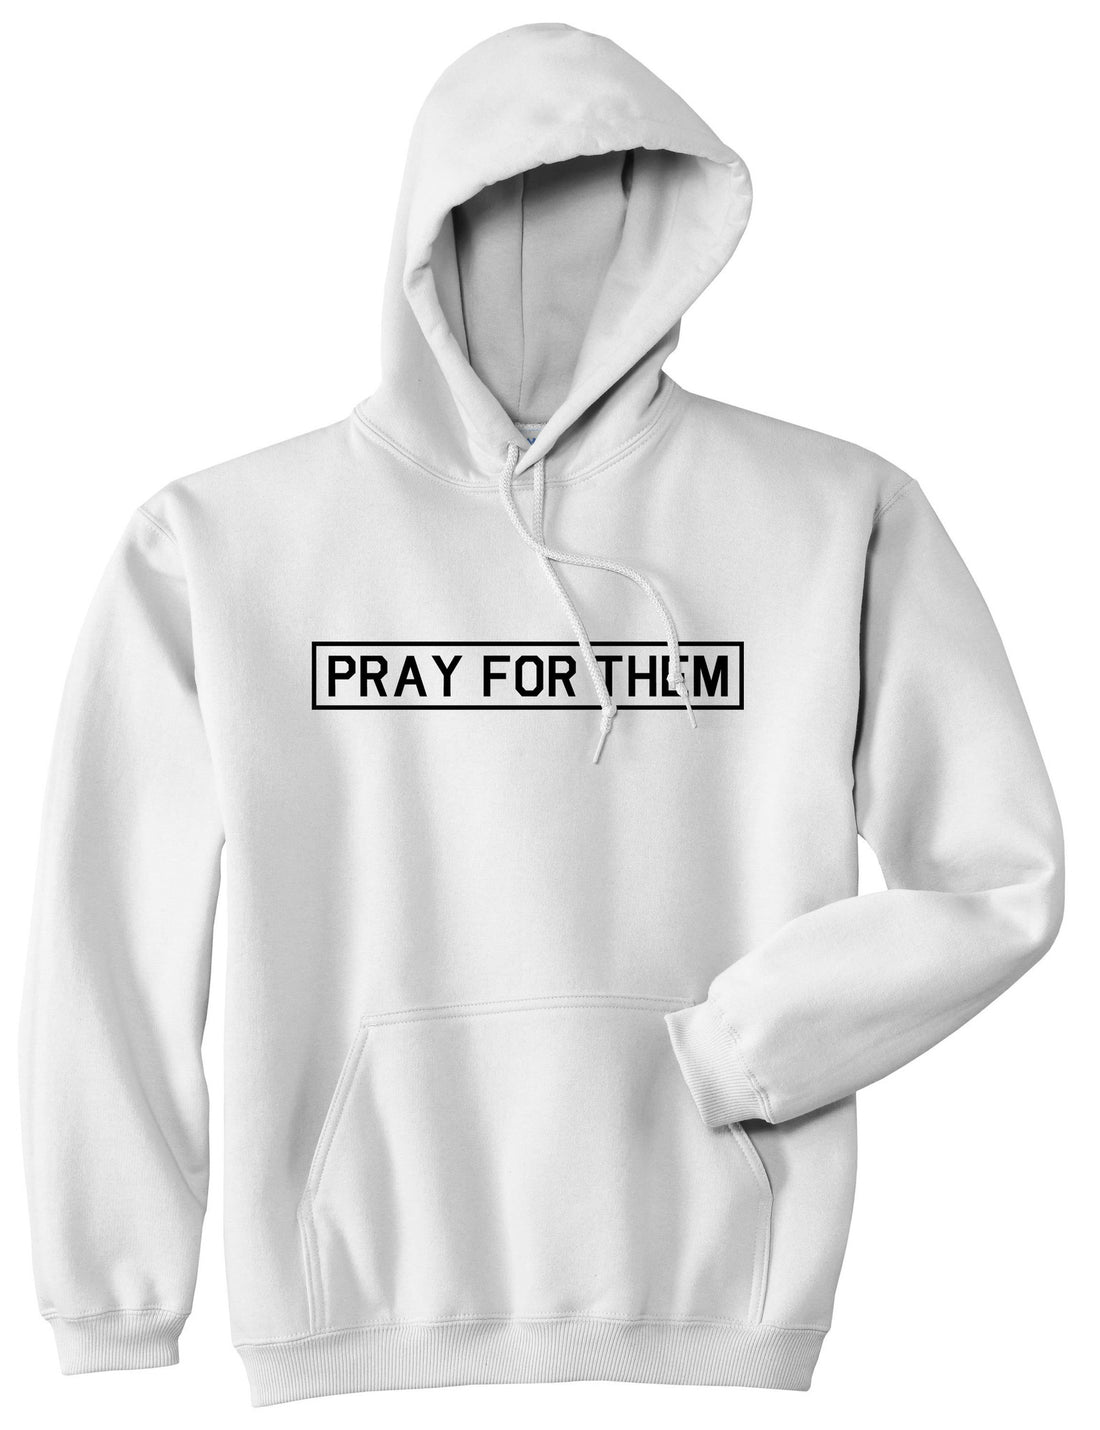 Pray For Them Fall15 Boys Kids Pullover Hoodie Hoody in White by Kings Of NY